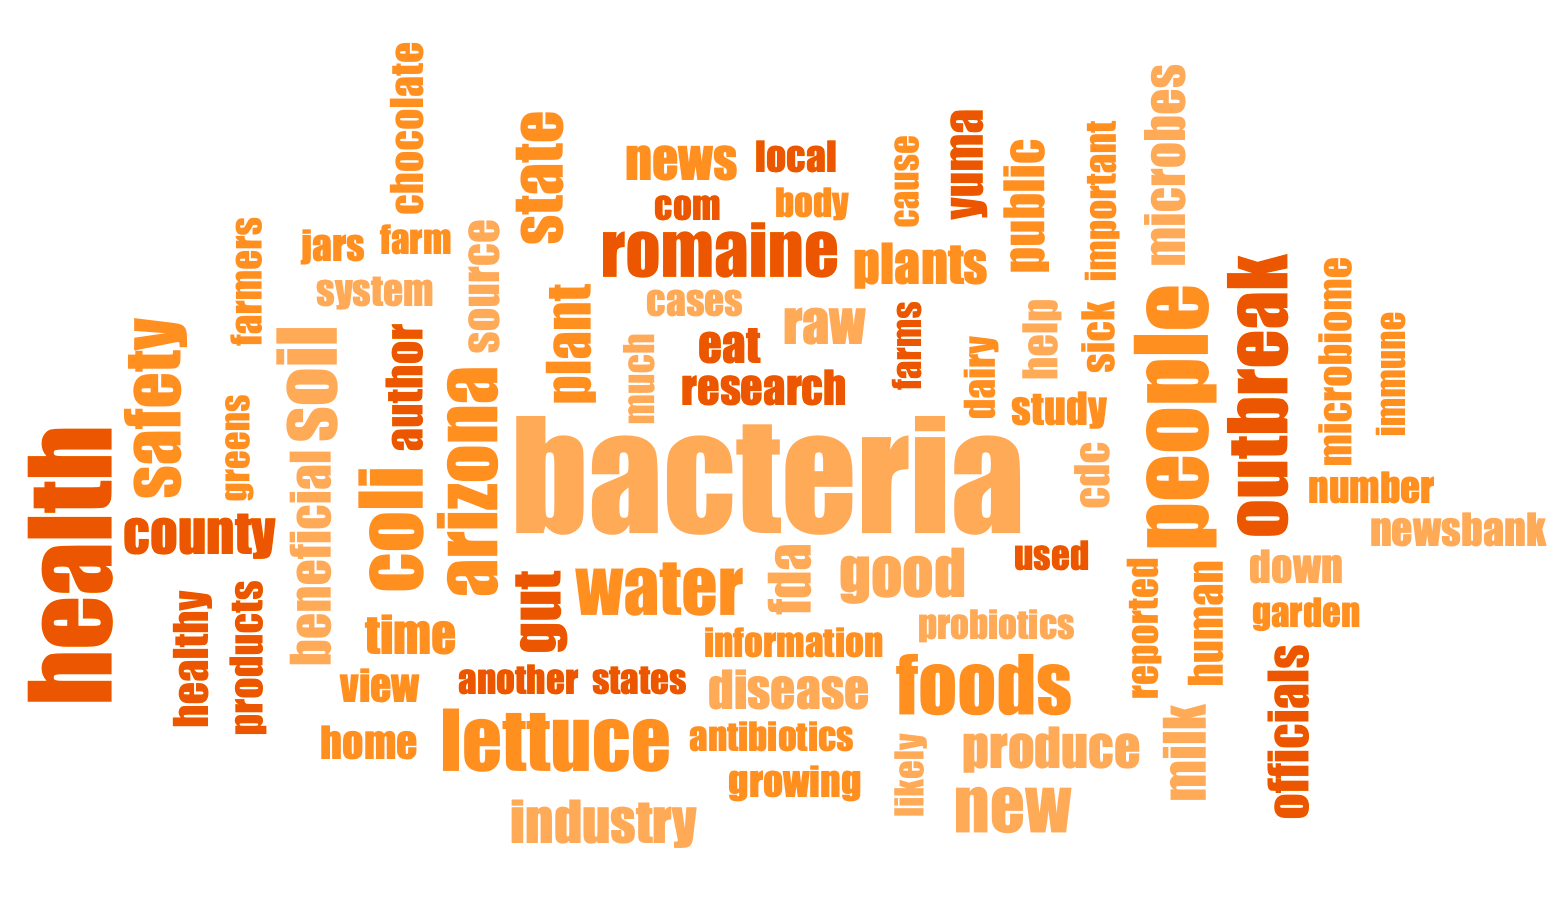 Figure 4: Screenshot from MAXQDA2020 showing a Word Cloud with words from articles from newspapers in Arizona.